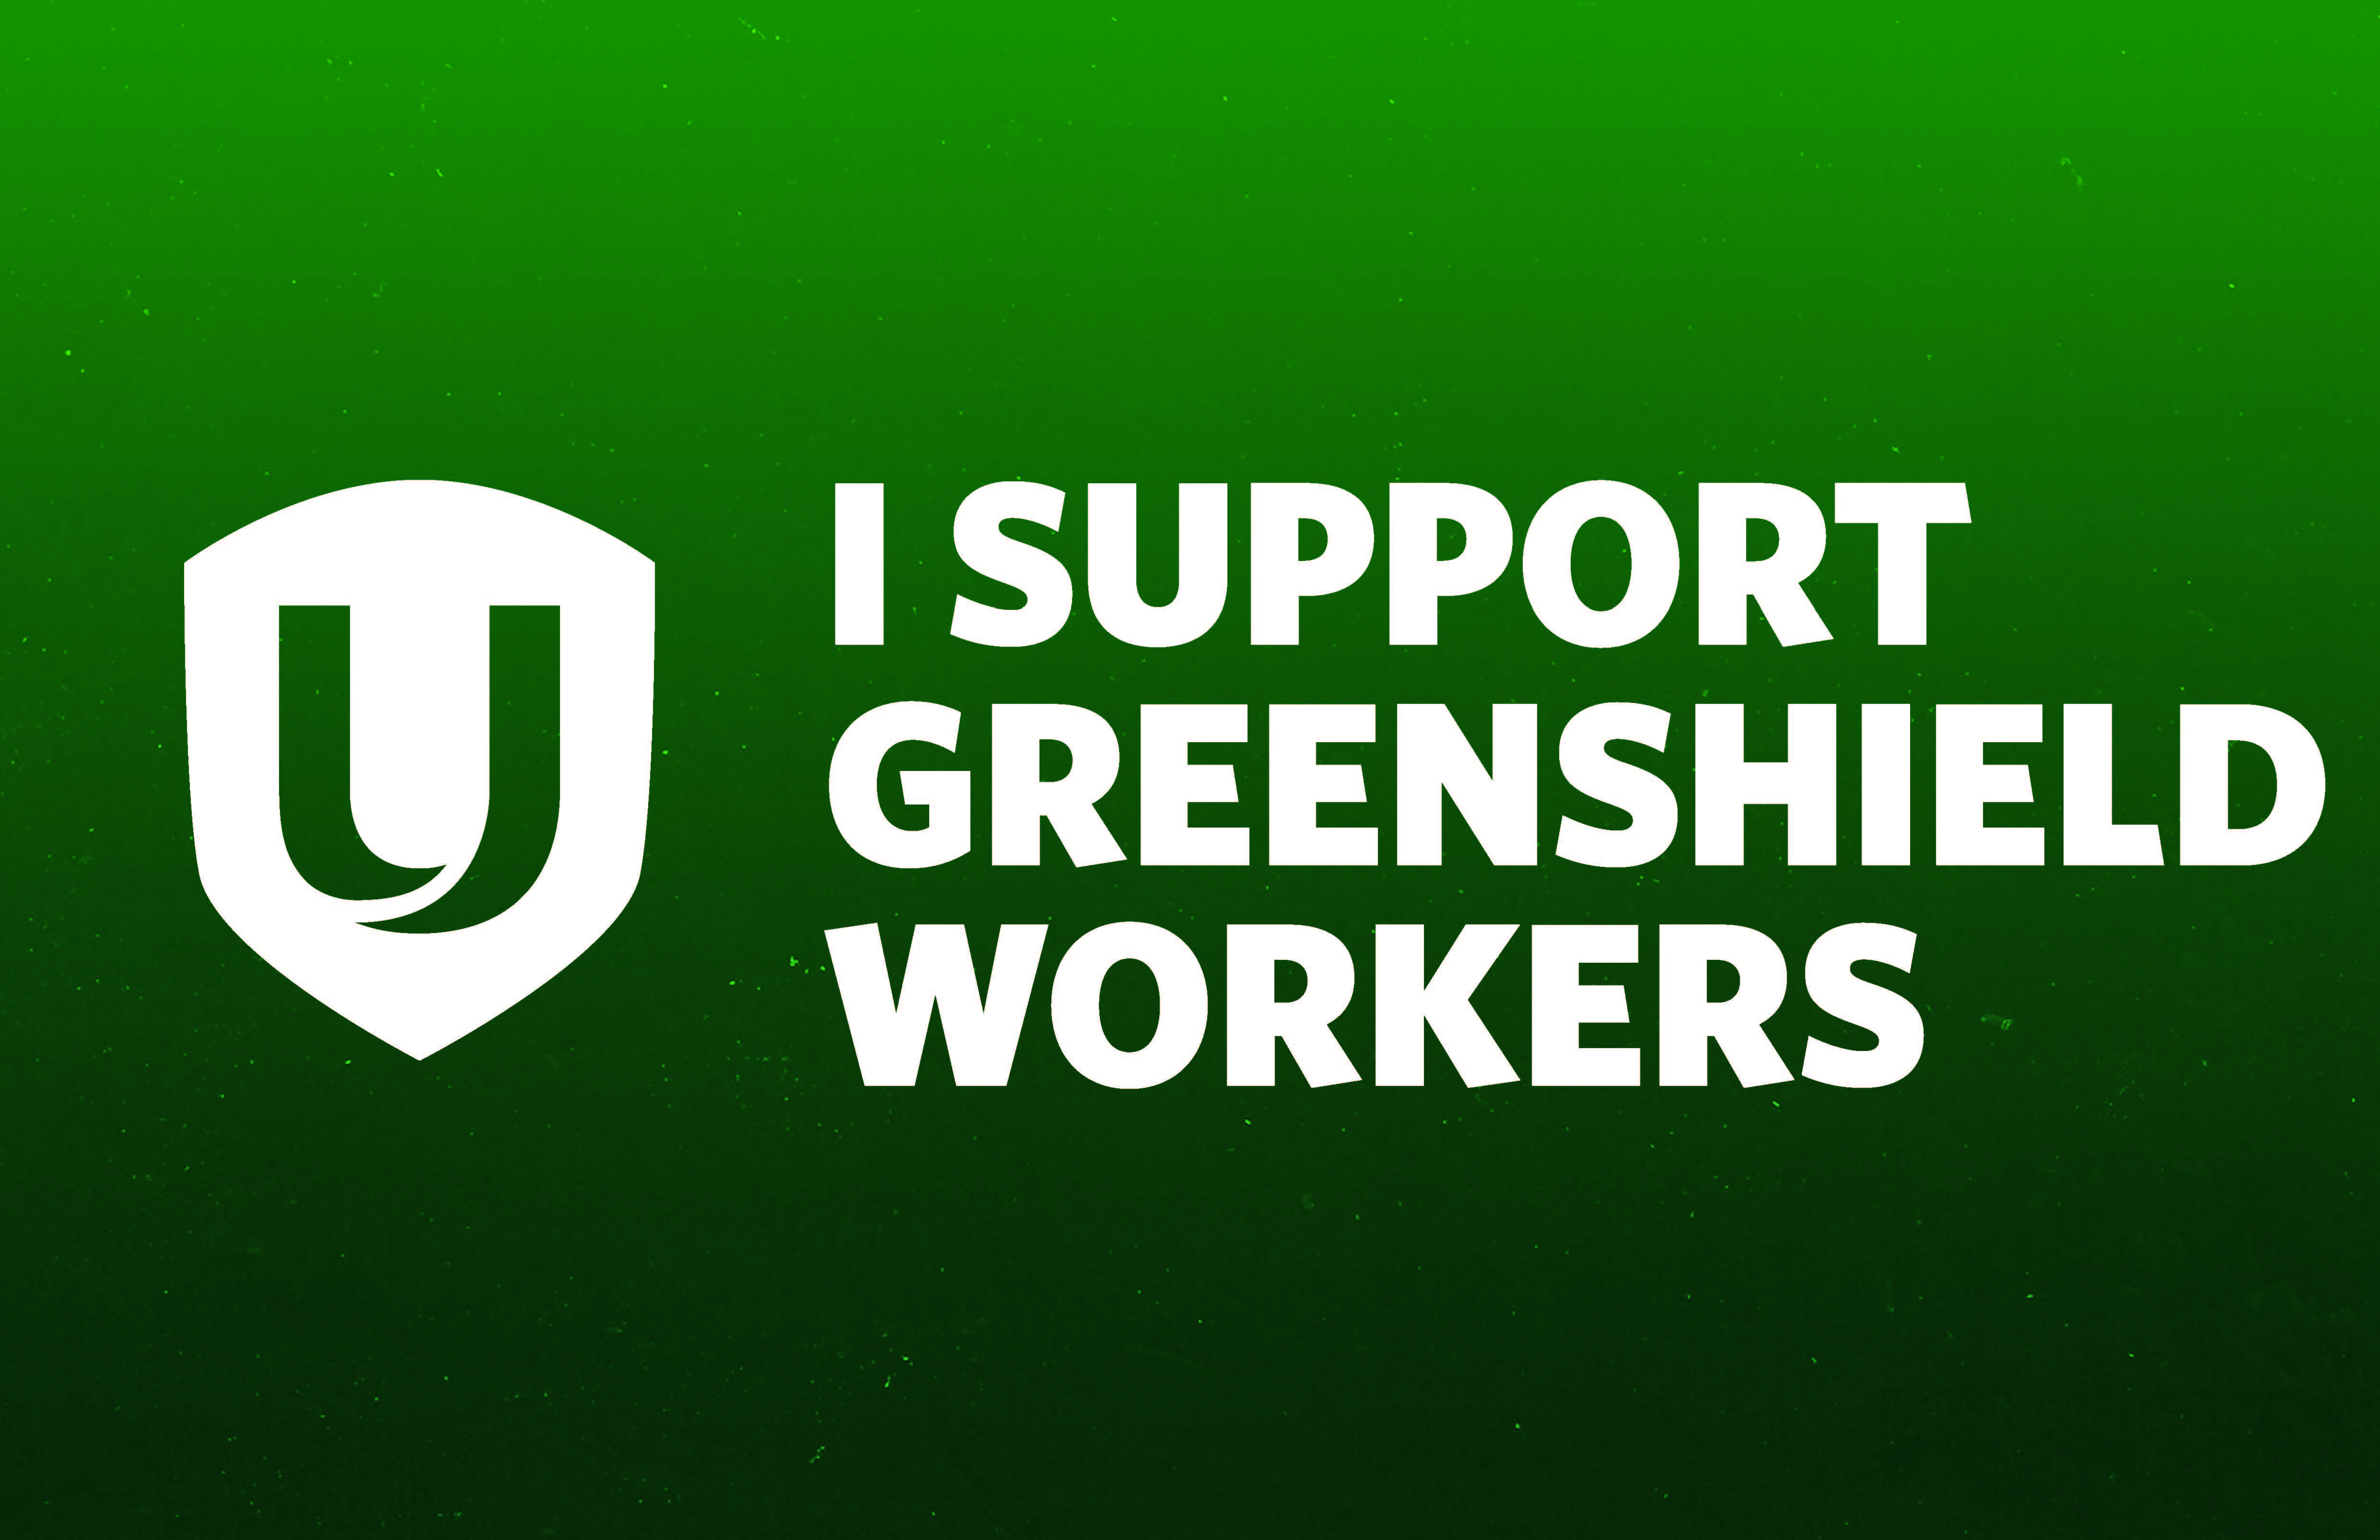 I support GreenShield workers, a white Unifor shield on a green background.